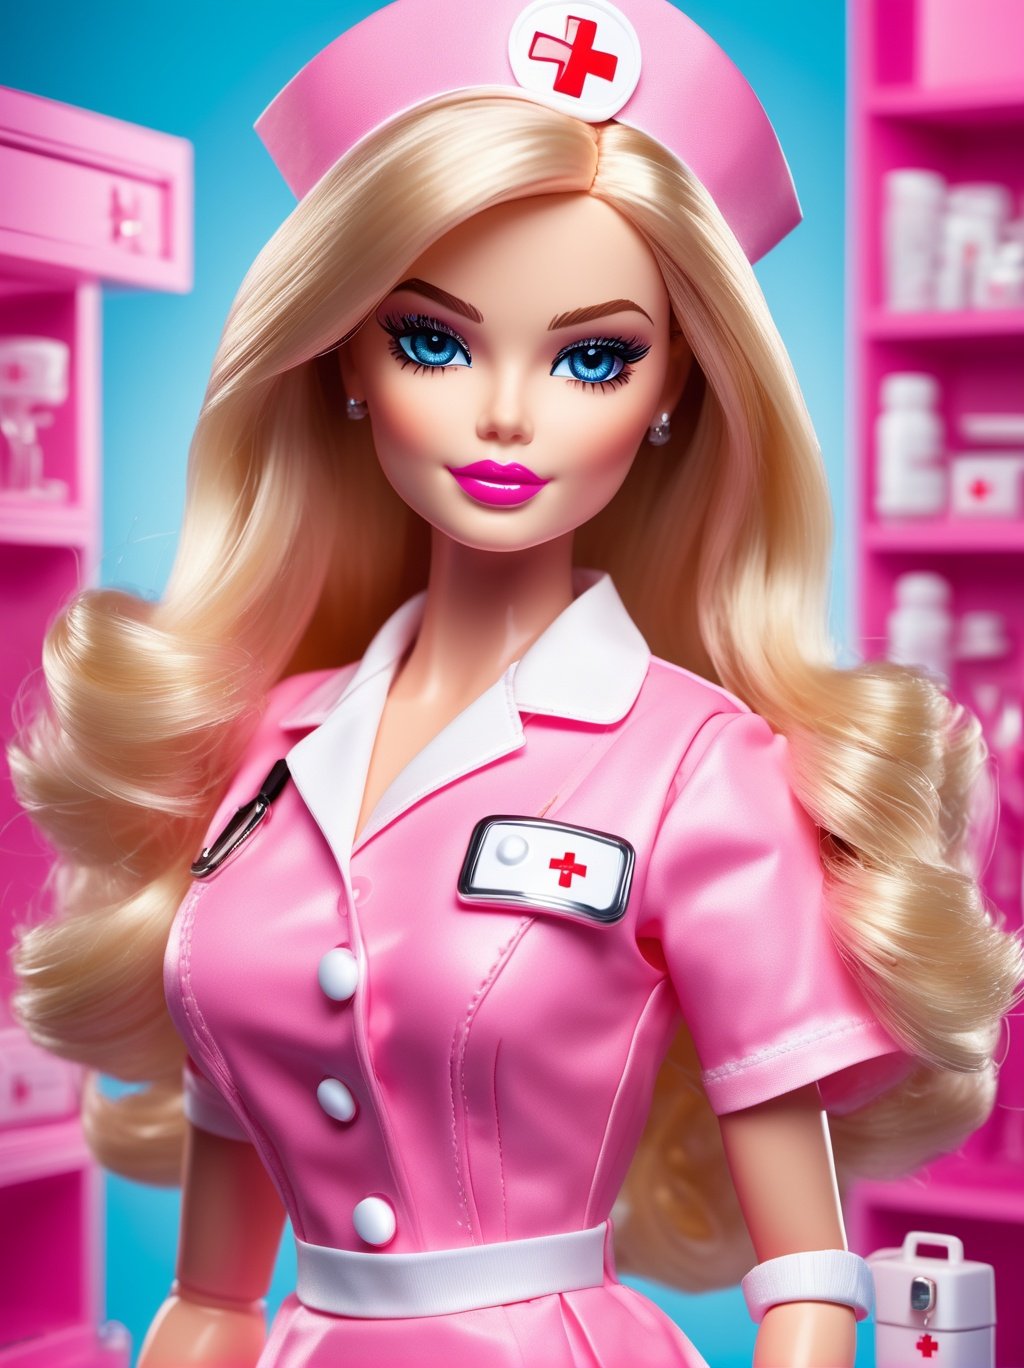 Ultra high resolution, high resolution, (masterpiece: 1.4), hyper-detail, 1girl, inboxDollPlaySetQuiron style, full body, no humans, doll, toy, barbie, in a gift box, character print, blonde hair, middle length hair, blight blue eyes, (((wearing a detailed pink theme nurse outfit and matching accessories:1.5))), pink sparkles, sprinkles, barbie pink color theme, beautiful female barbie, full lips, parted_lips, heavy make-up, smoky eyes, detailed eyes, pretty face,3DMM,inboxDollPlaySetQuiron style,(margot robbie),<lyco:sdxl1_quiron_inboxDollPlaySet_v3_lycoris:1.0>